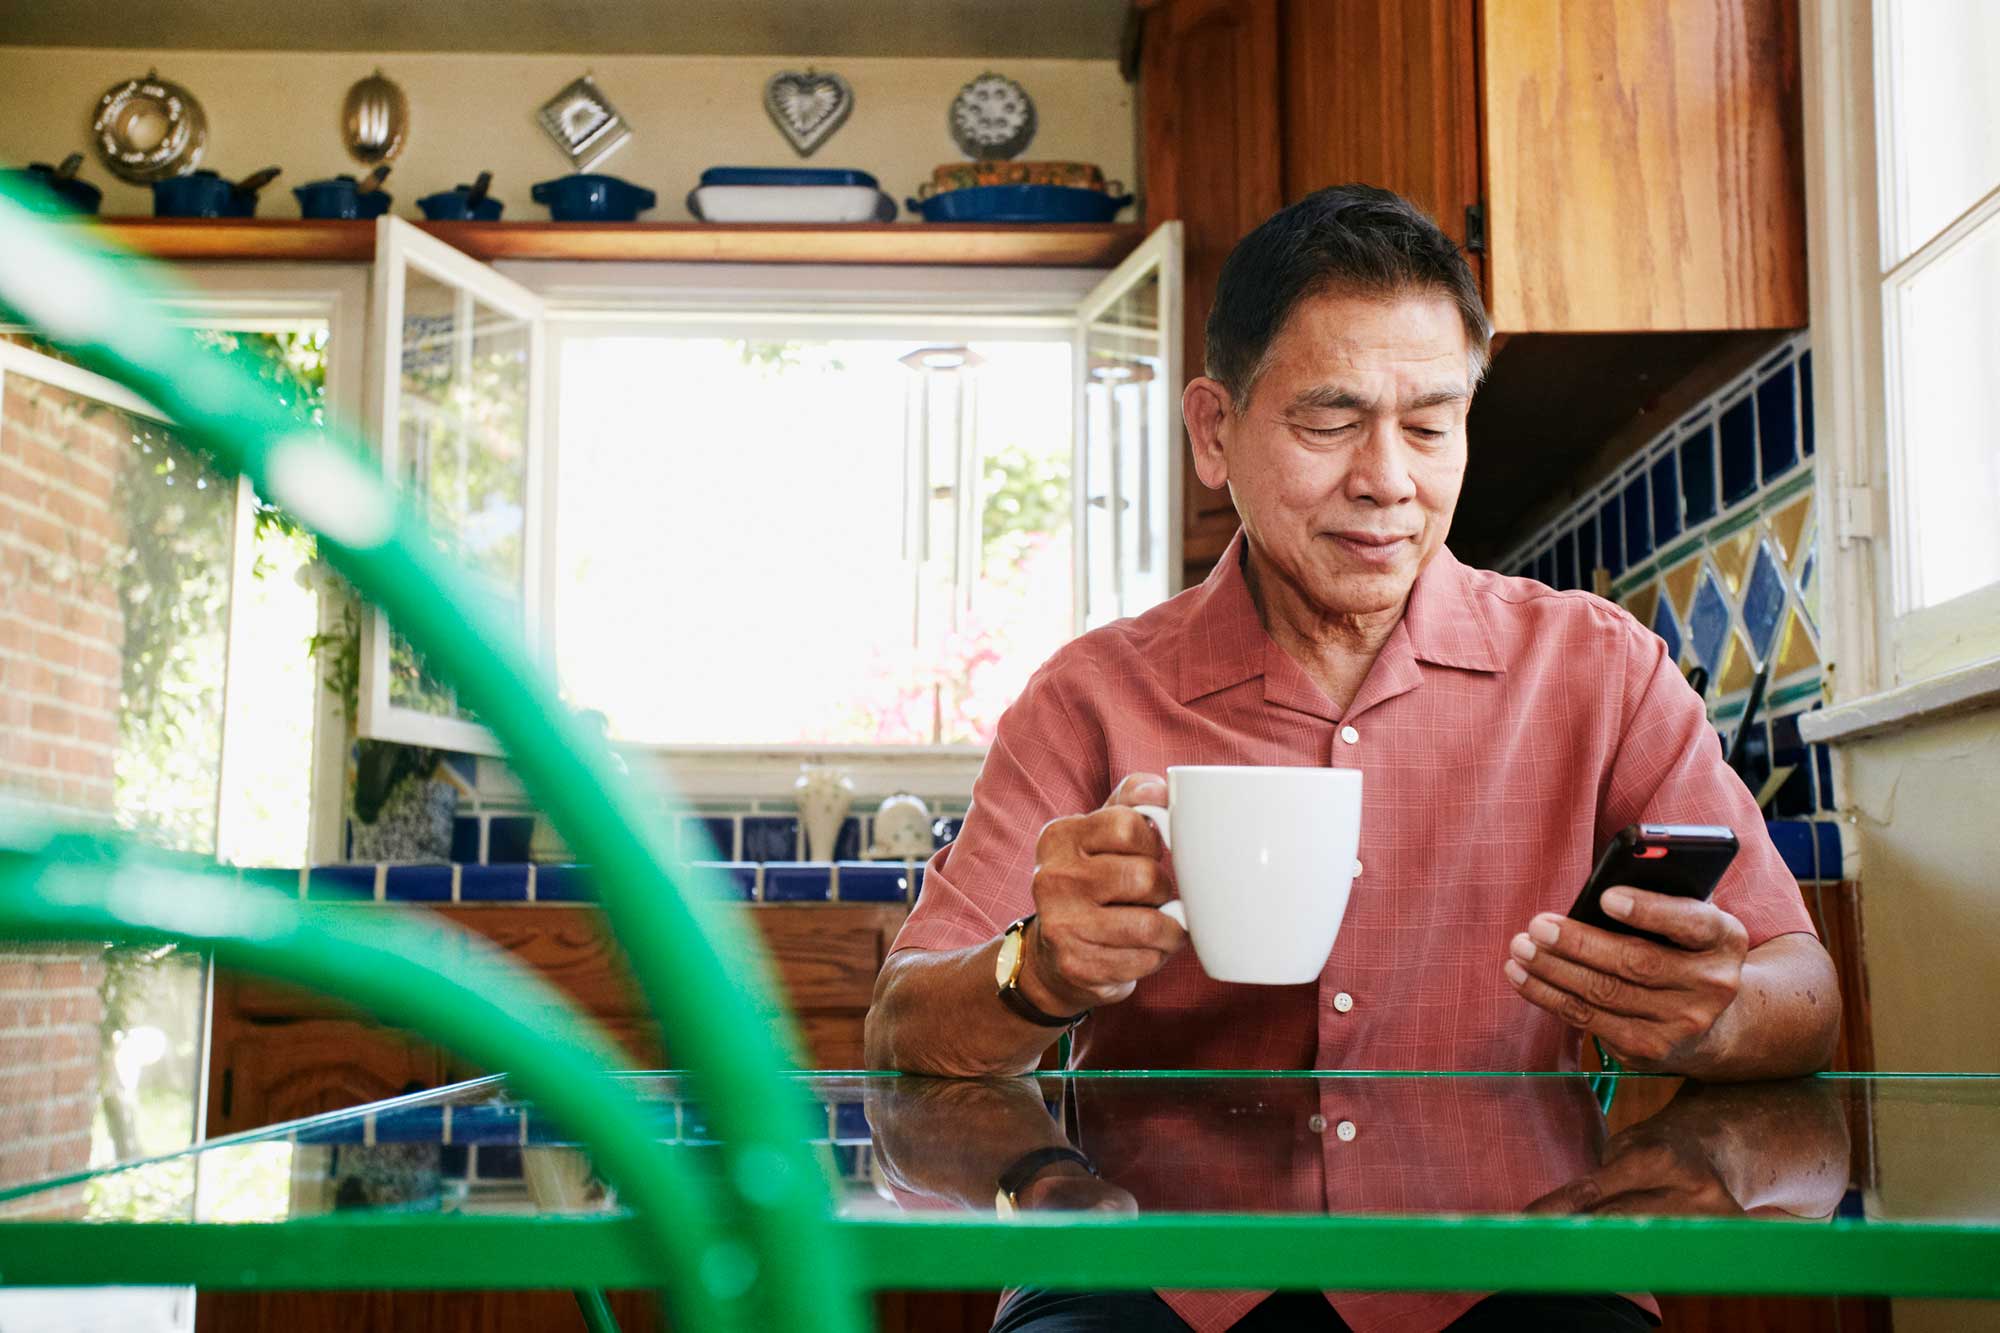 n older man enjoying a cup of coffee while using his phone at a table